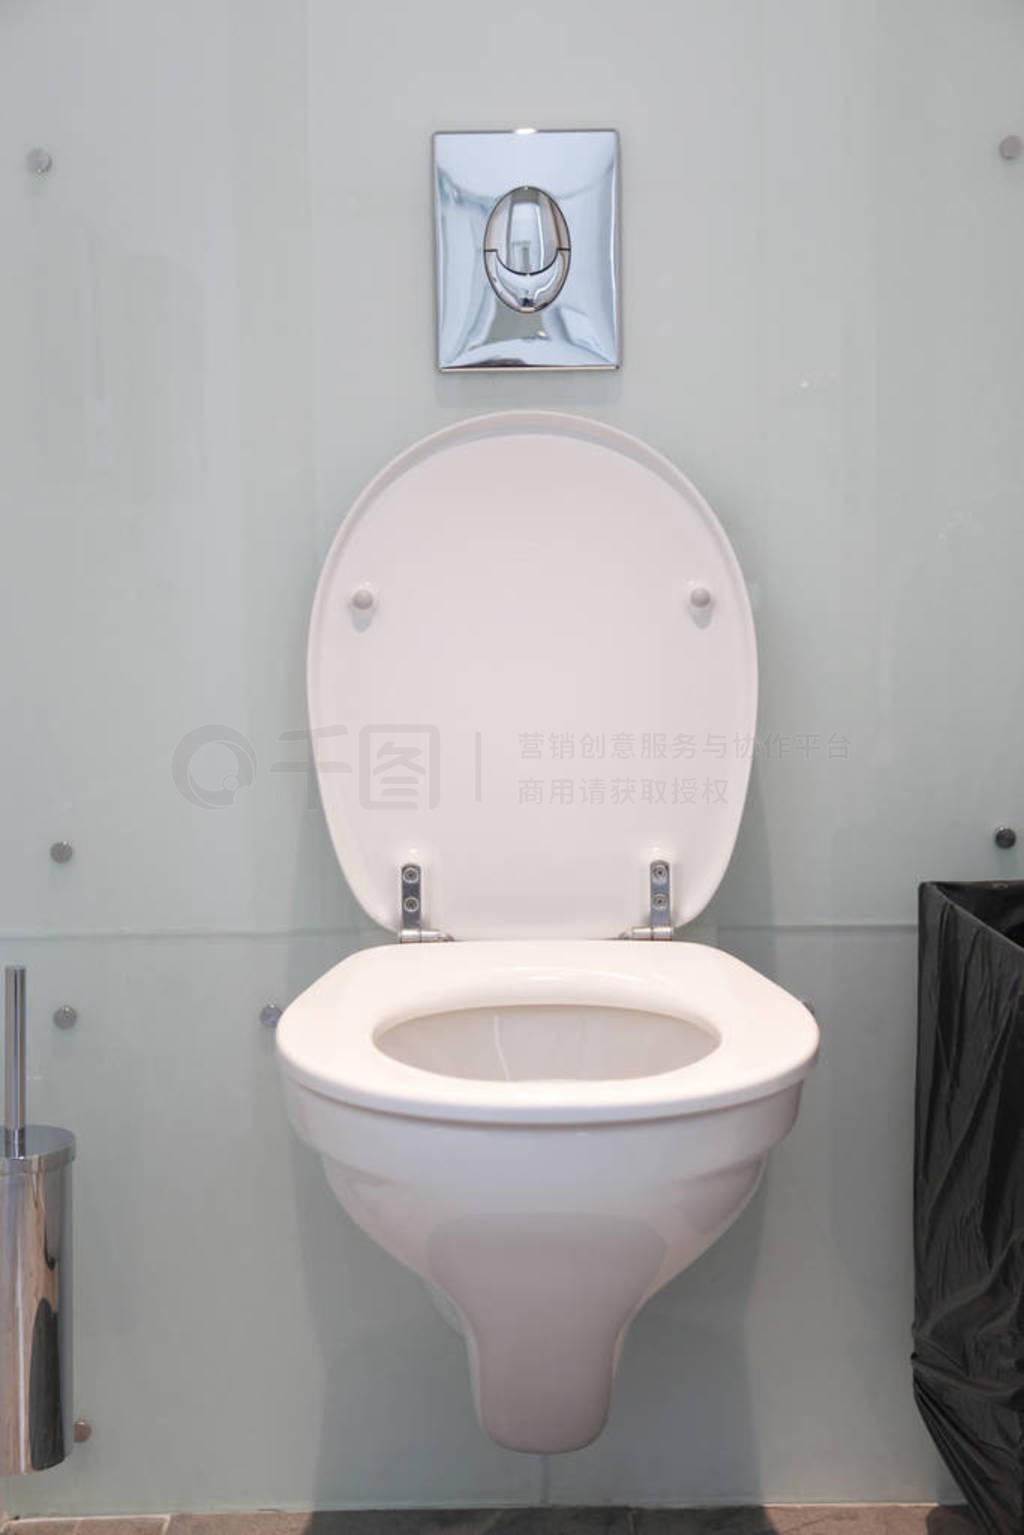 Toilet design with built-in toilet with glass walls. Flush buil